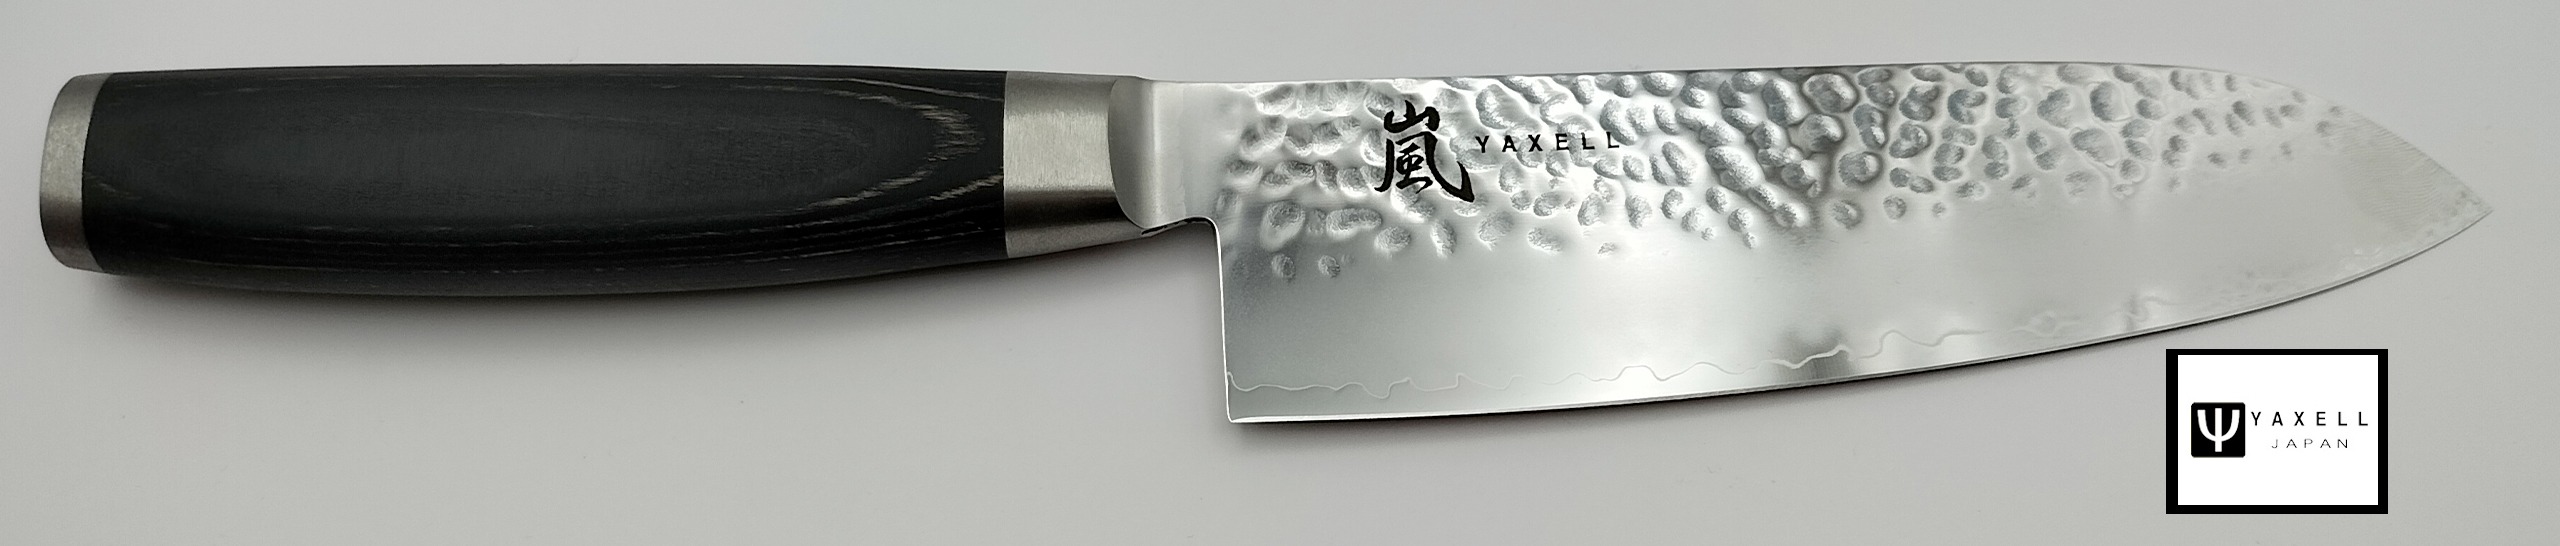 artisan coutellier yaxell taishi couteau